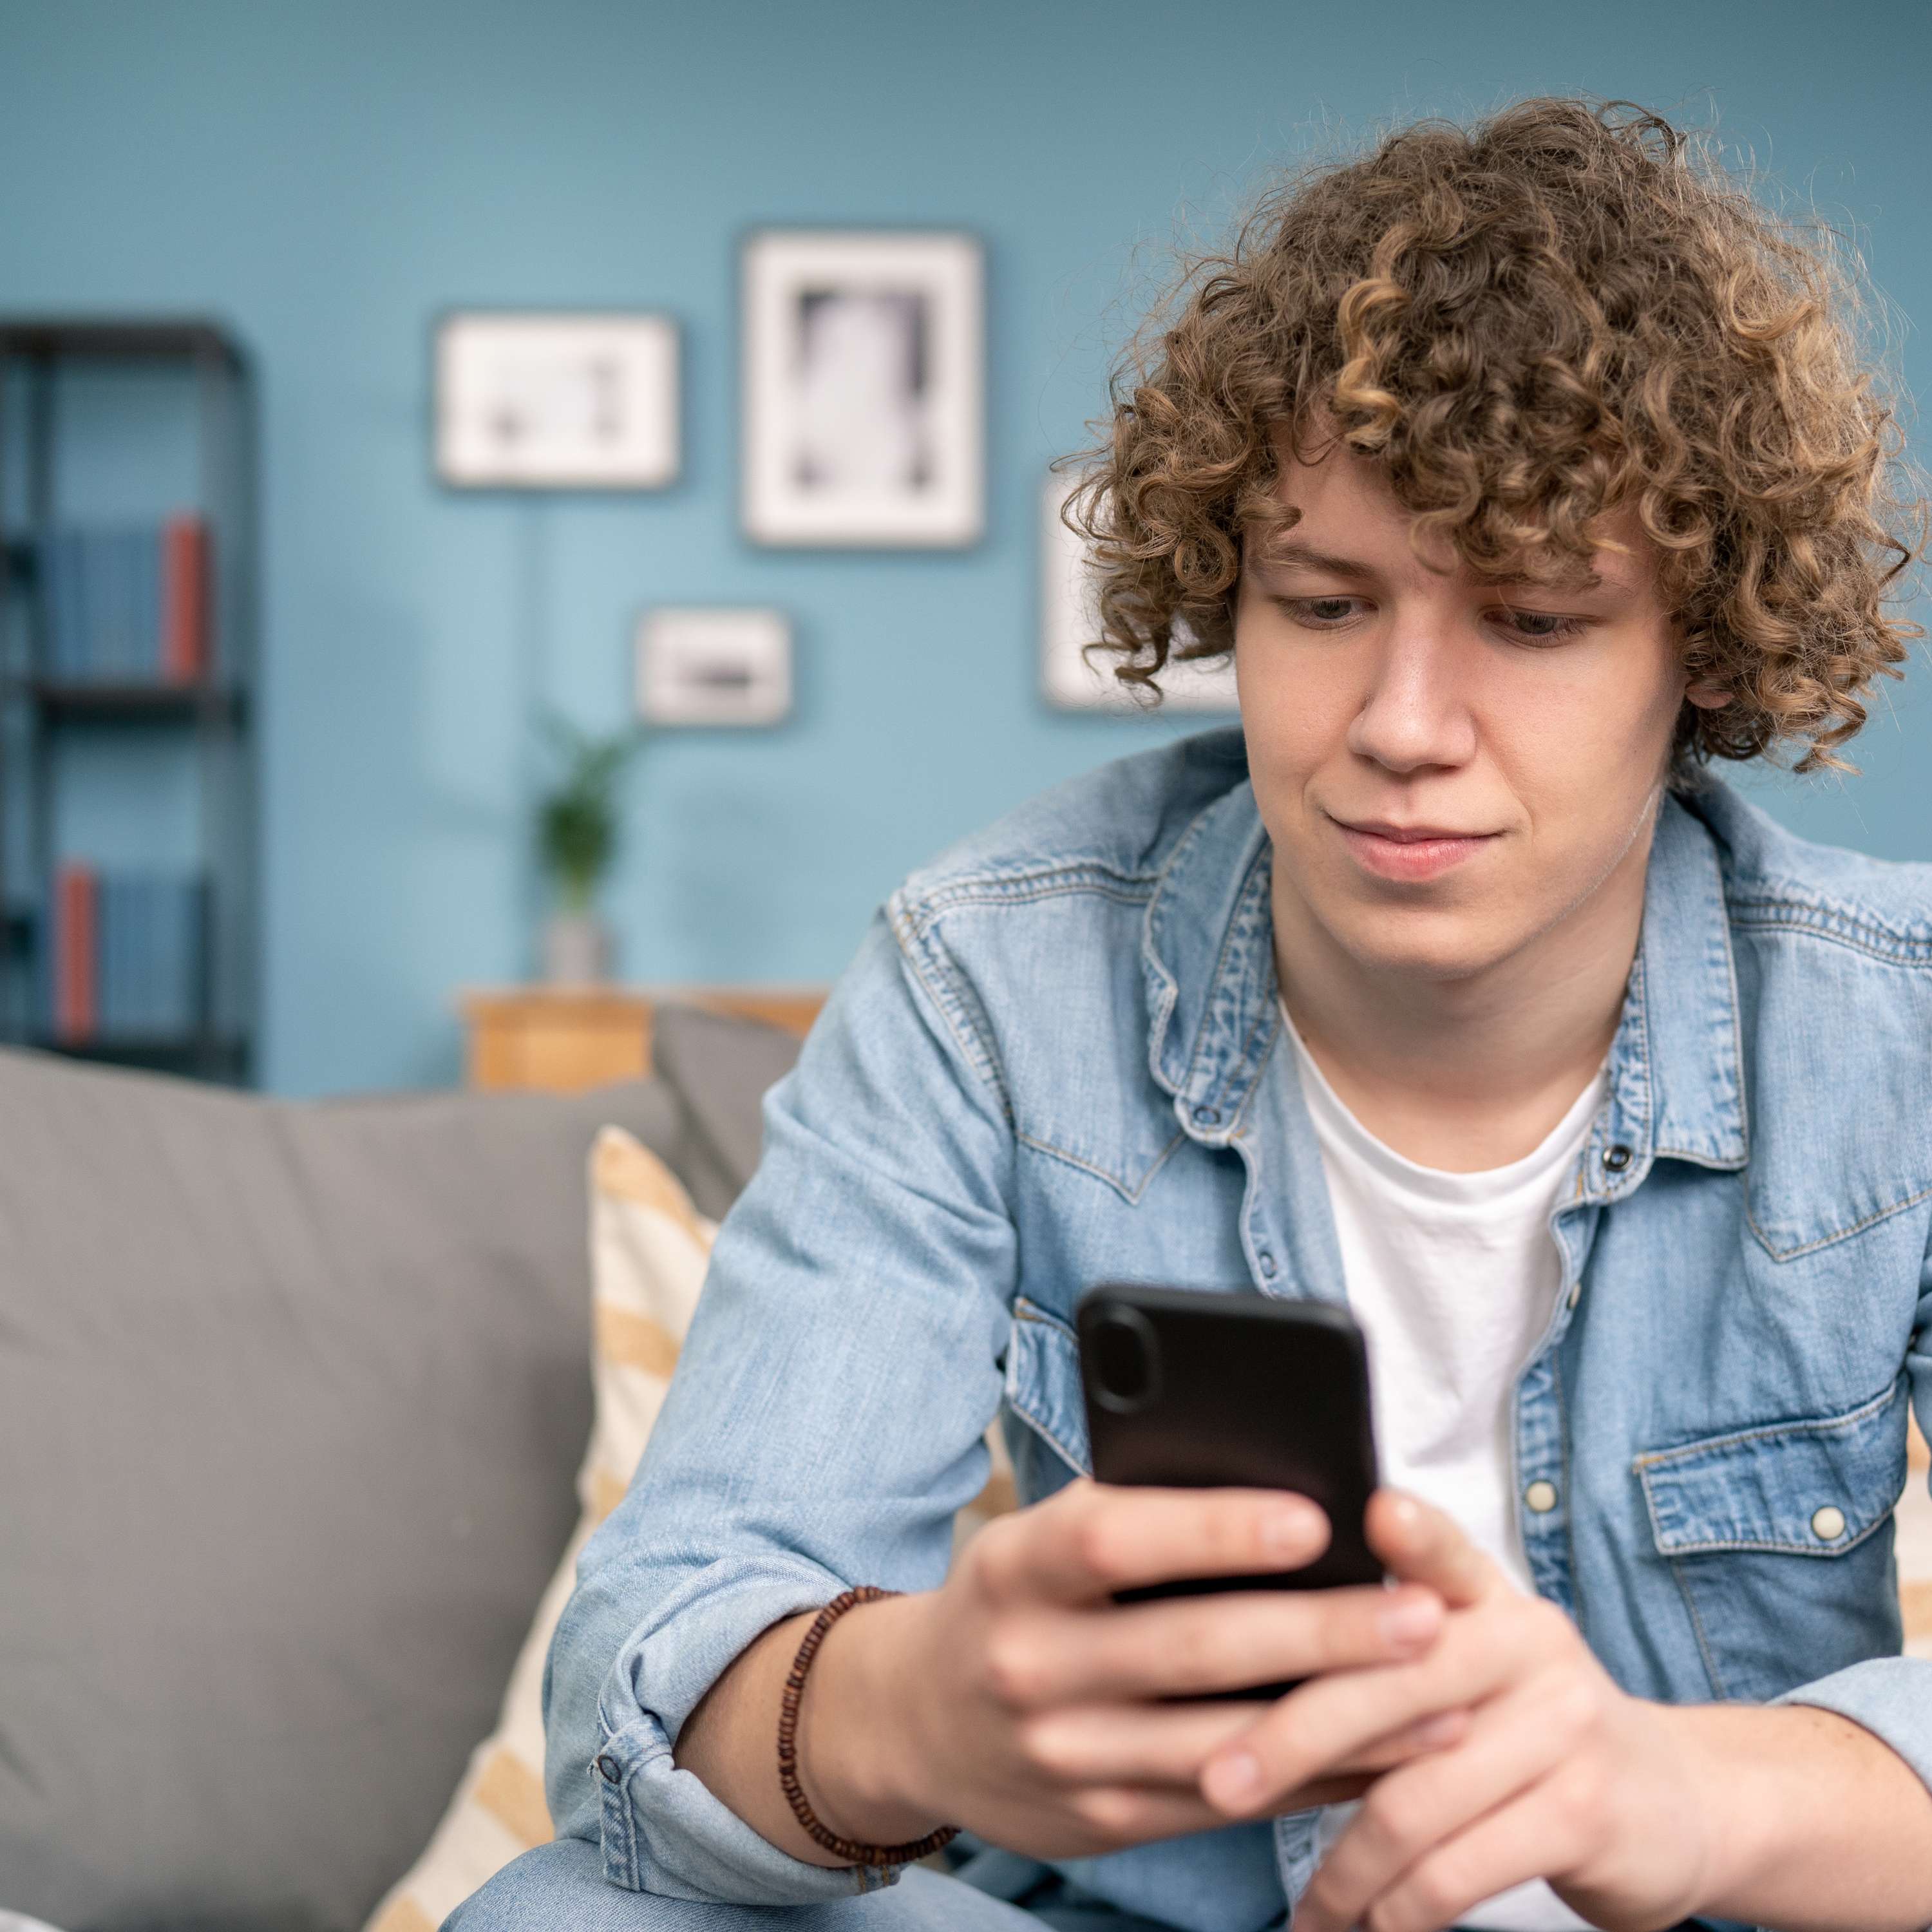 eMHPrac Webinar 67: Smartphone apps for depression and anxiety in young people